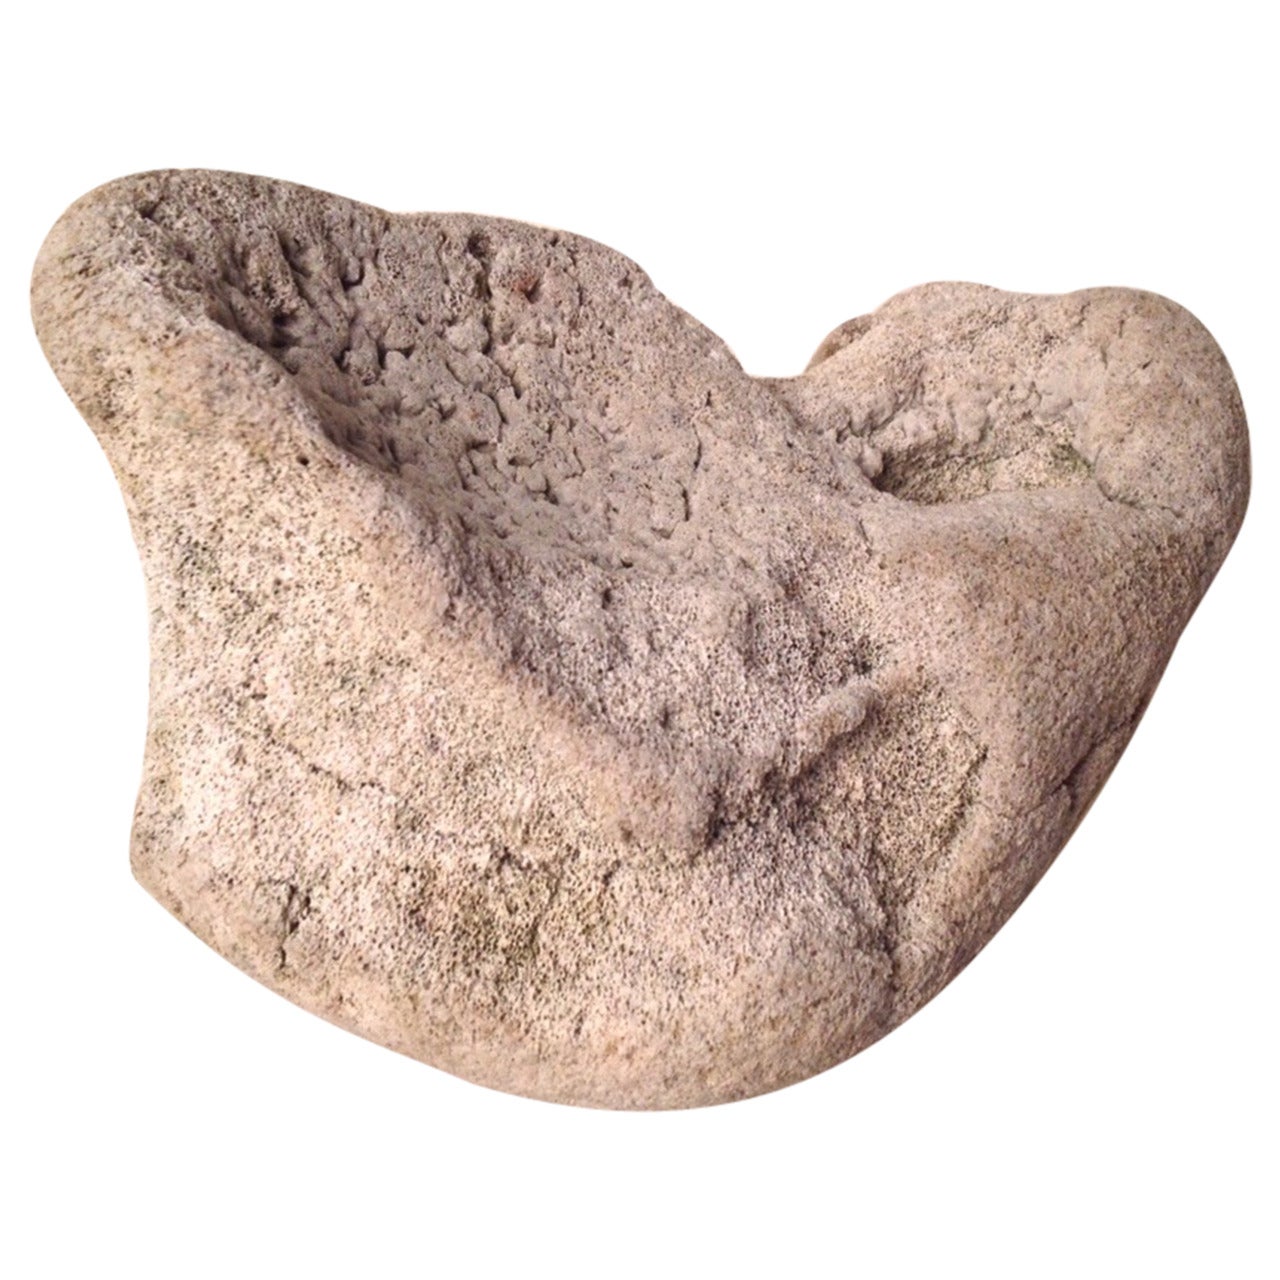 Fossilized Whale Bone Object For Sale